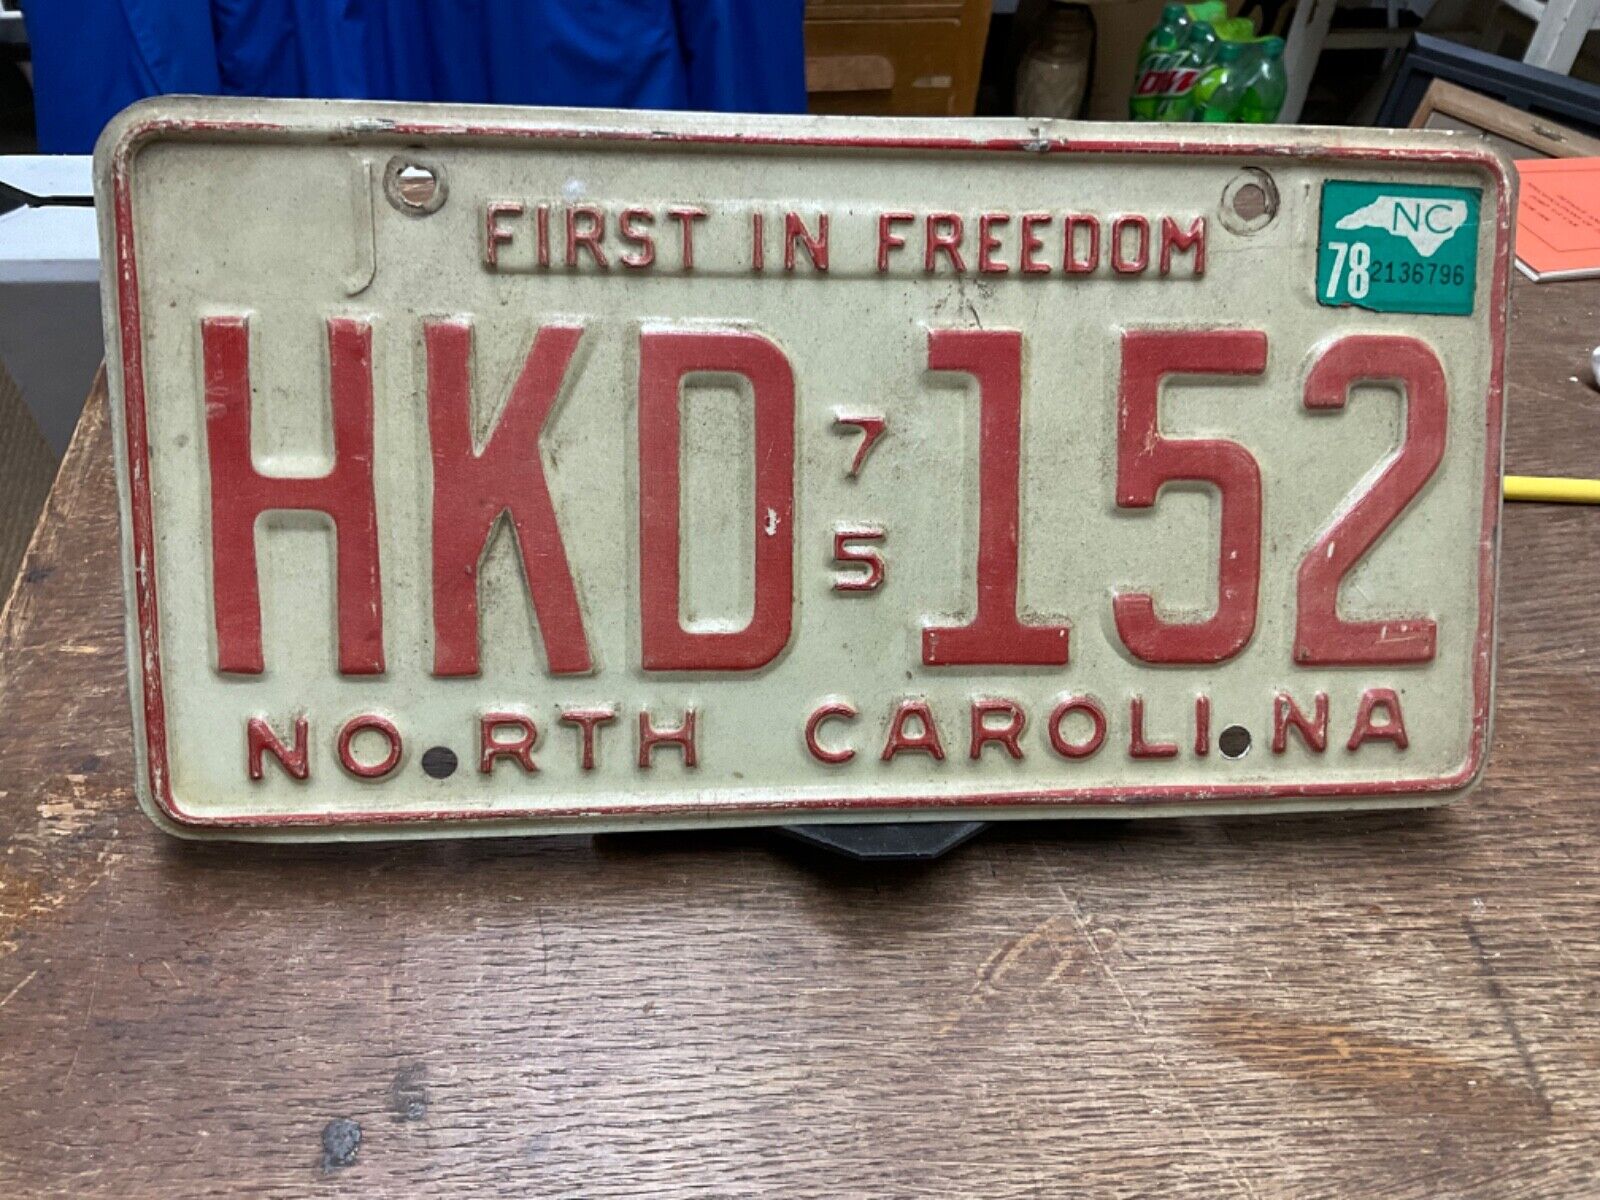 License Plate North Carolina NC 1978 First in Freedom HKD 152 Vintage Rustic